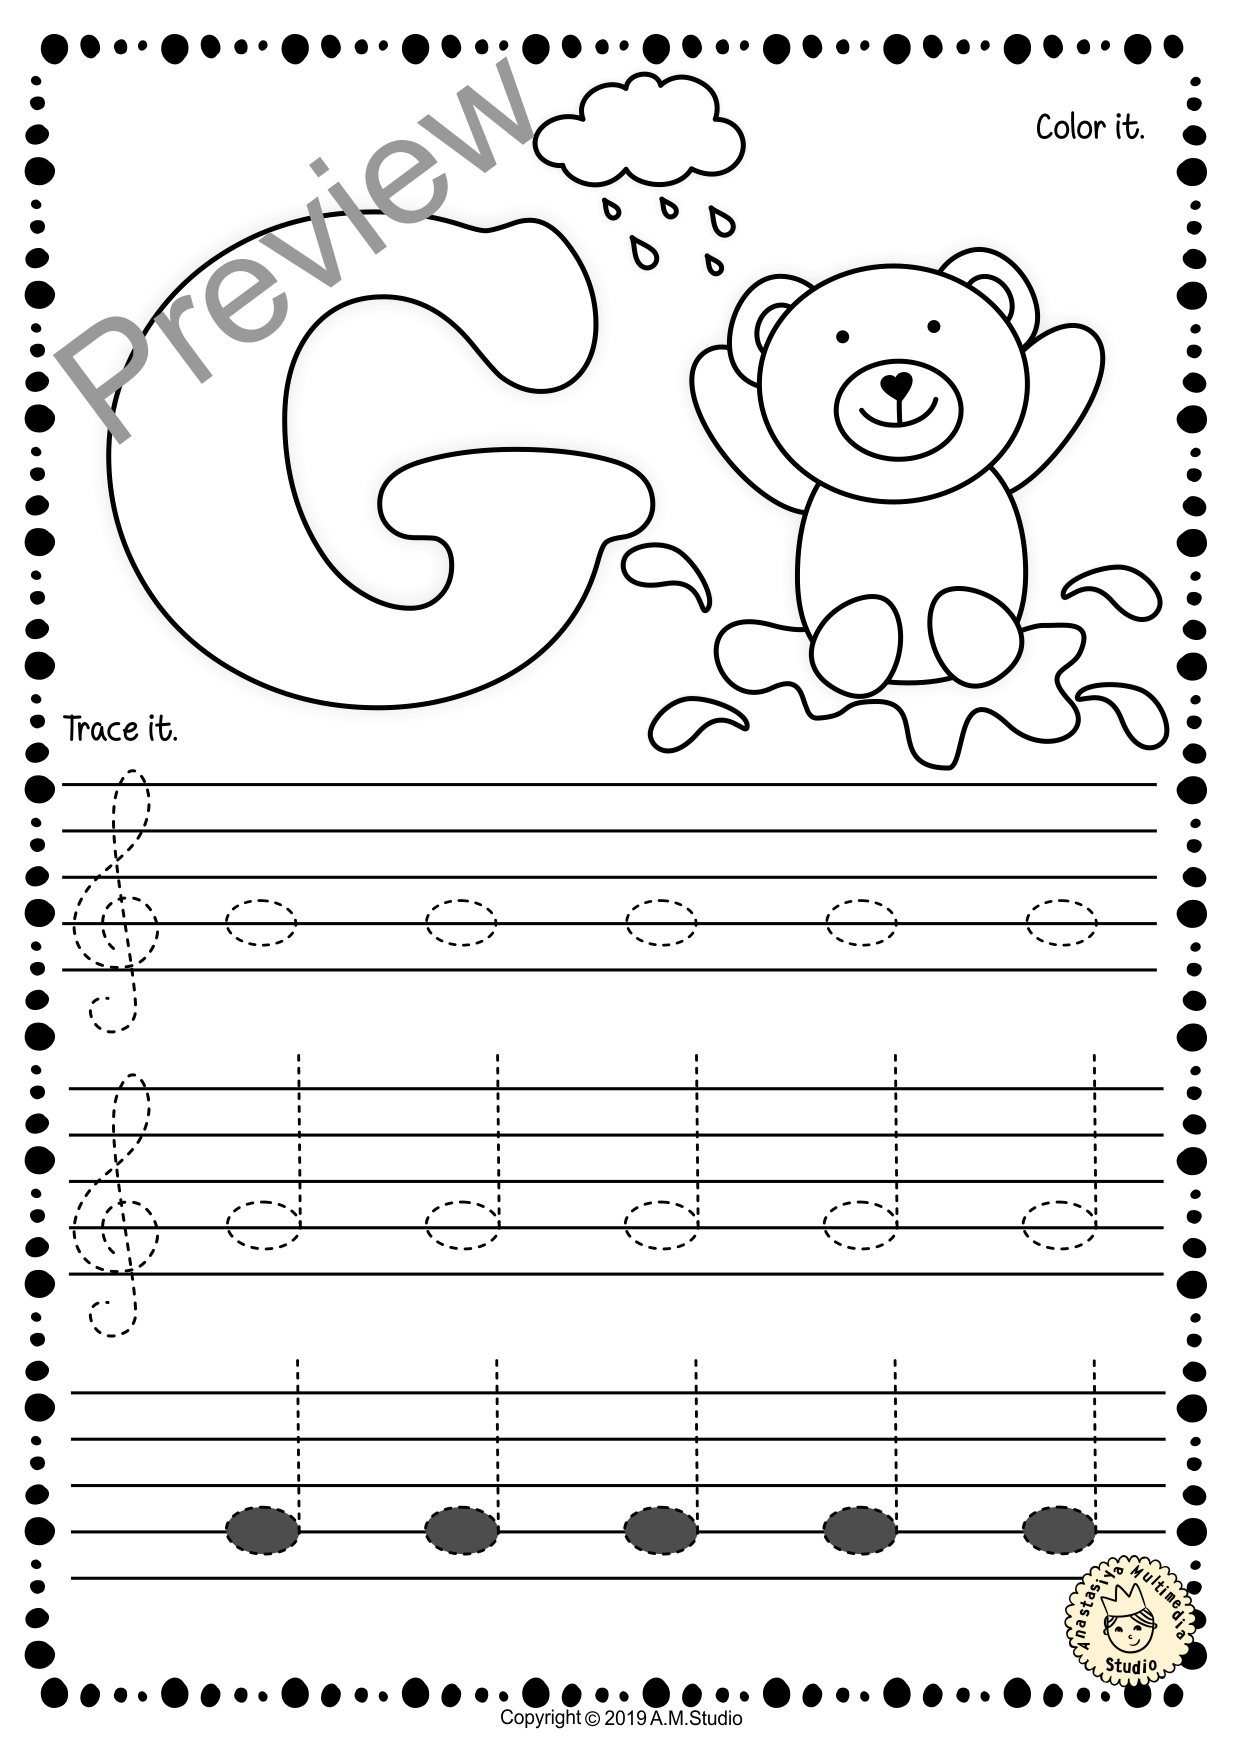 Treble Clef Tracing Music Notes Worksheets for Spring (img # 2)